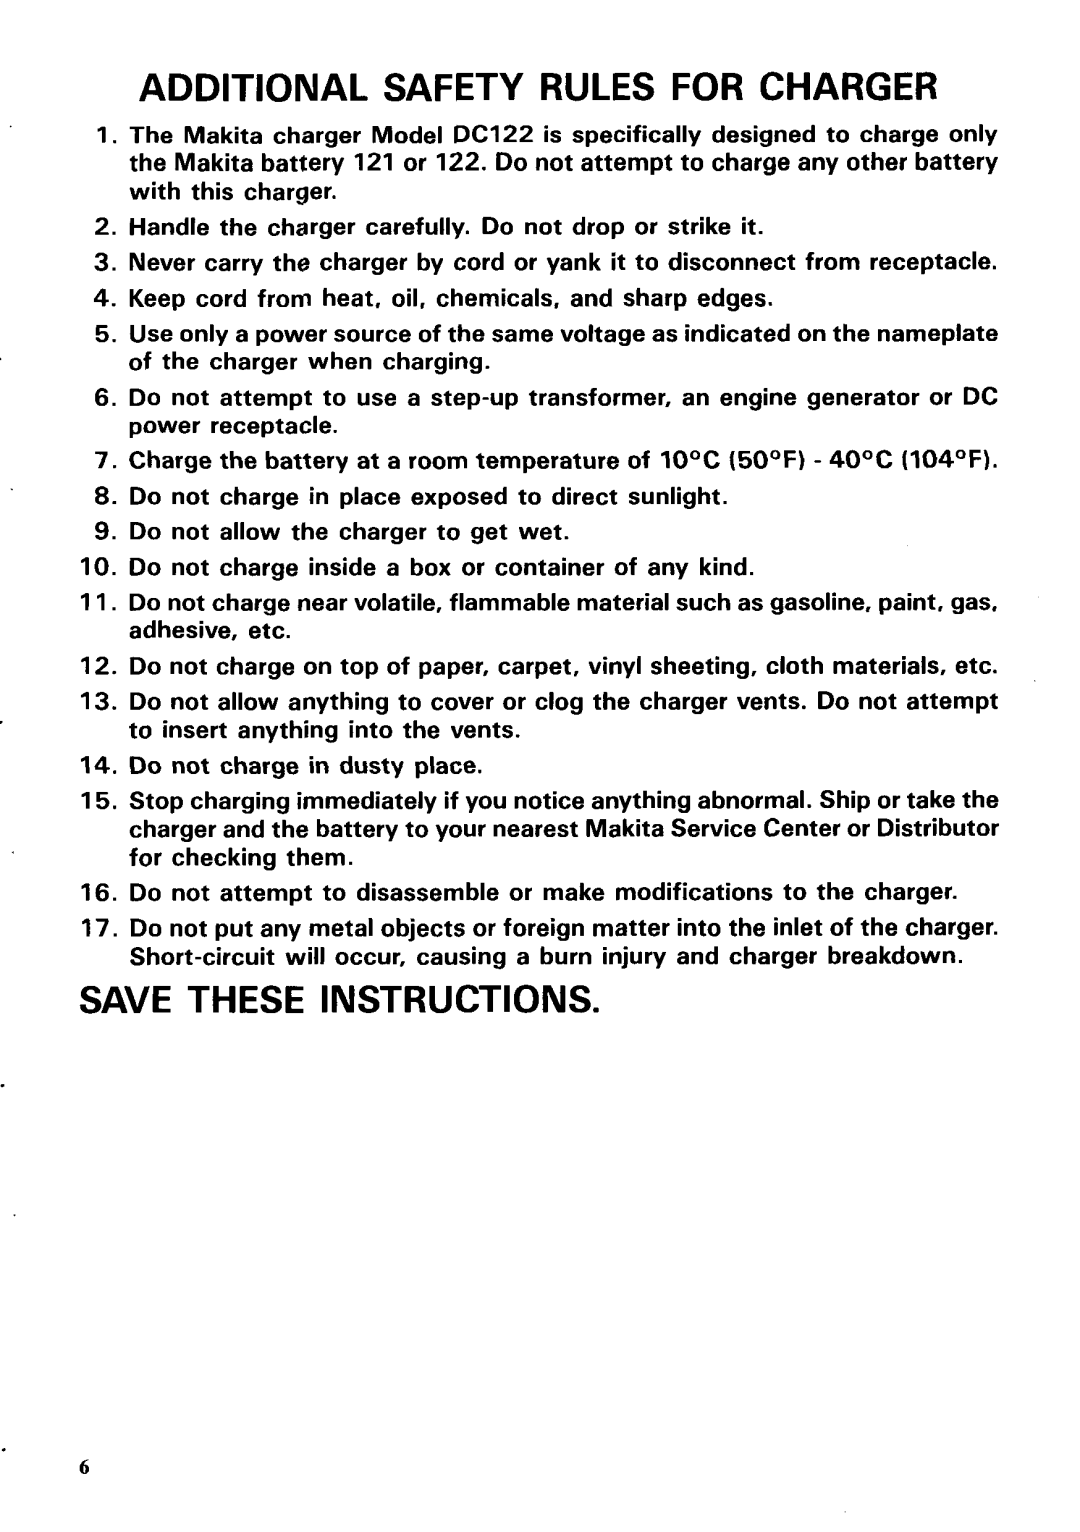 Makita UH303DST instruction manual Additional Safety Rules For Charger, Save These Instructions 